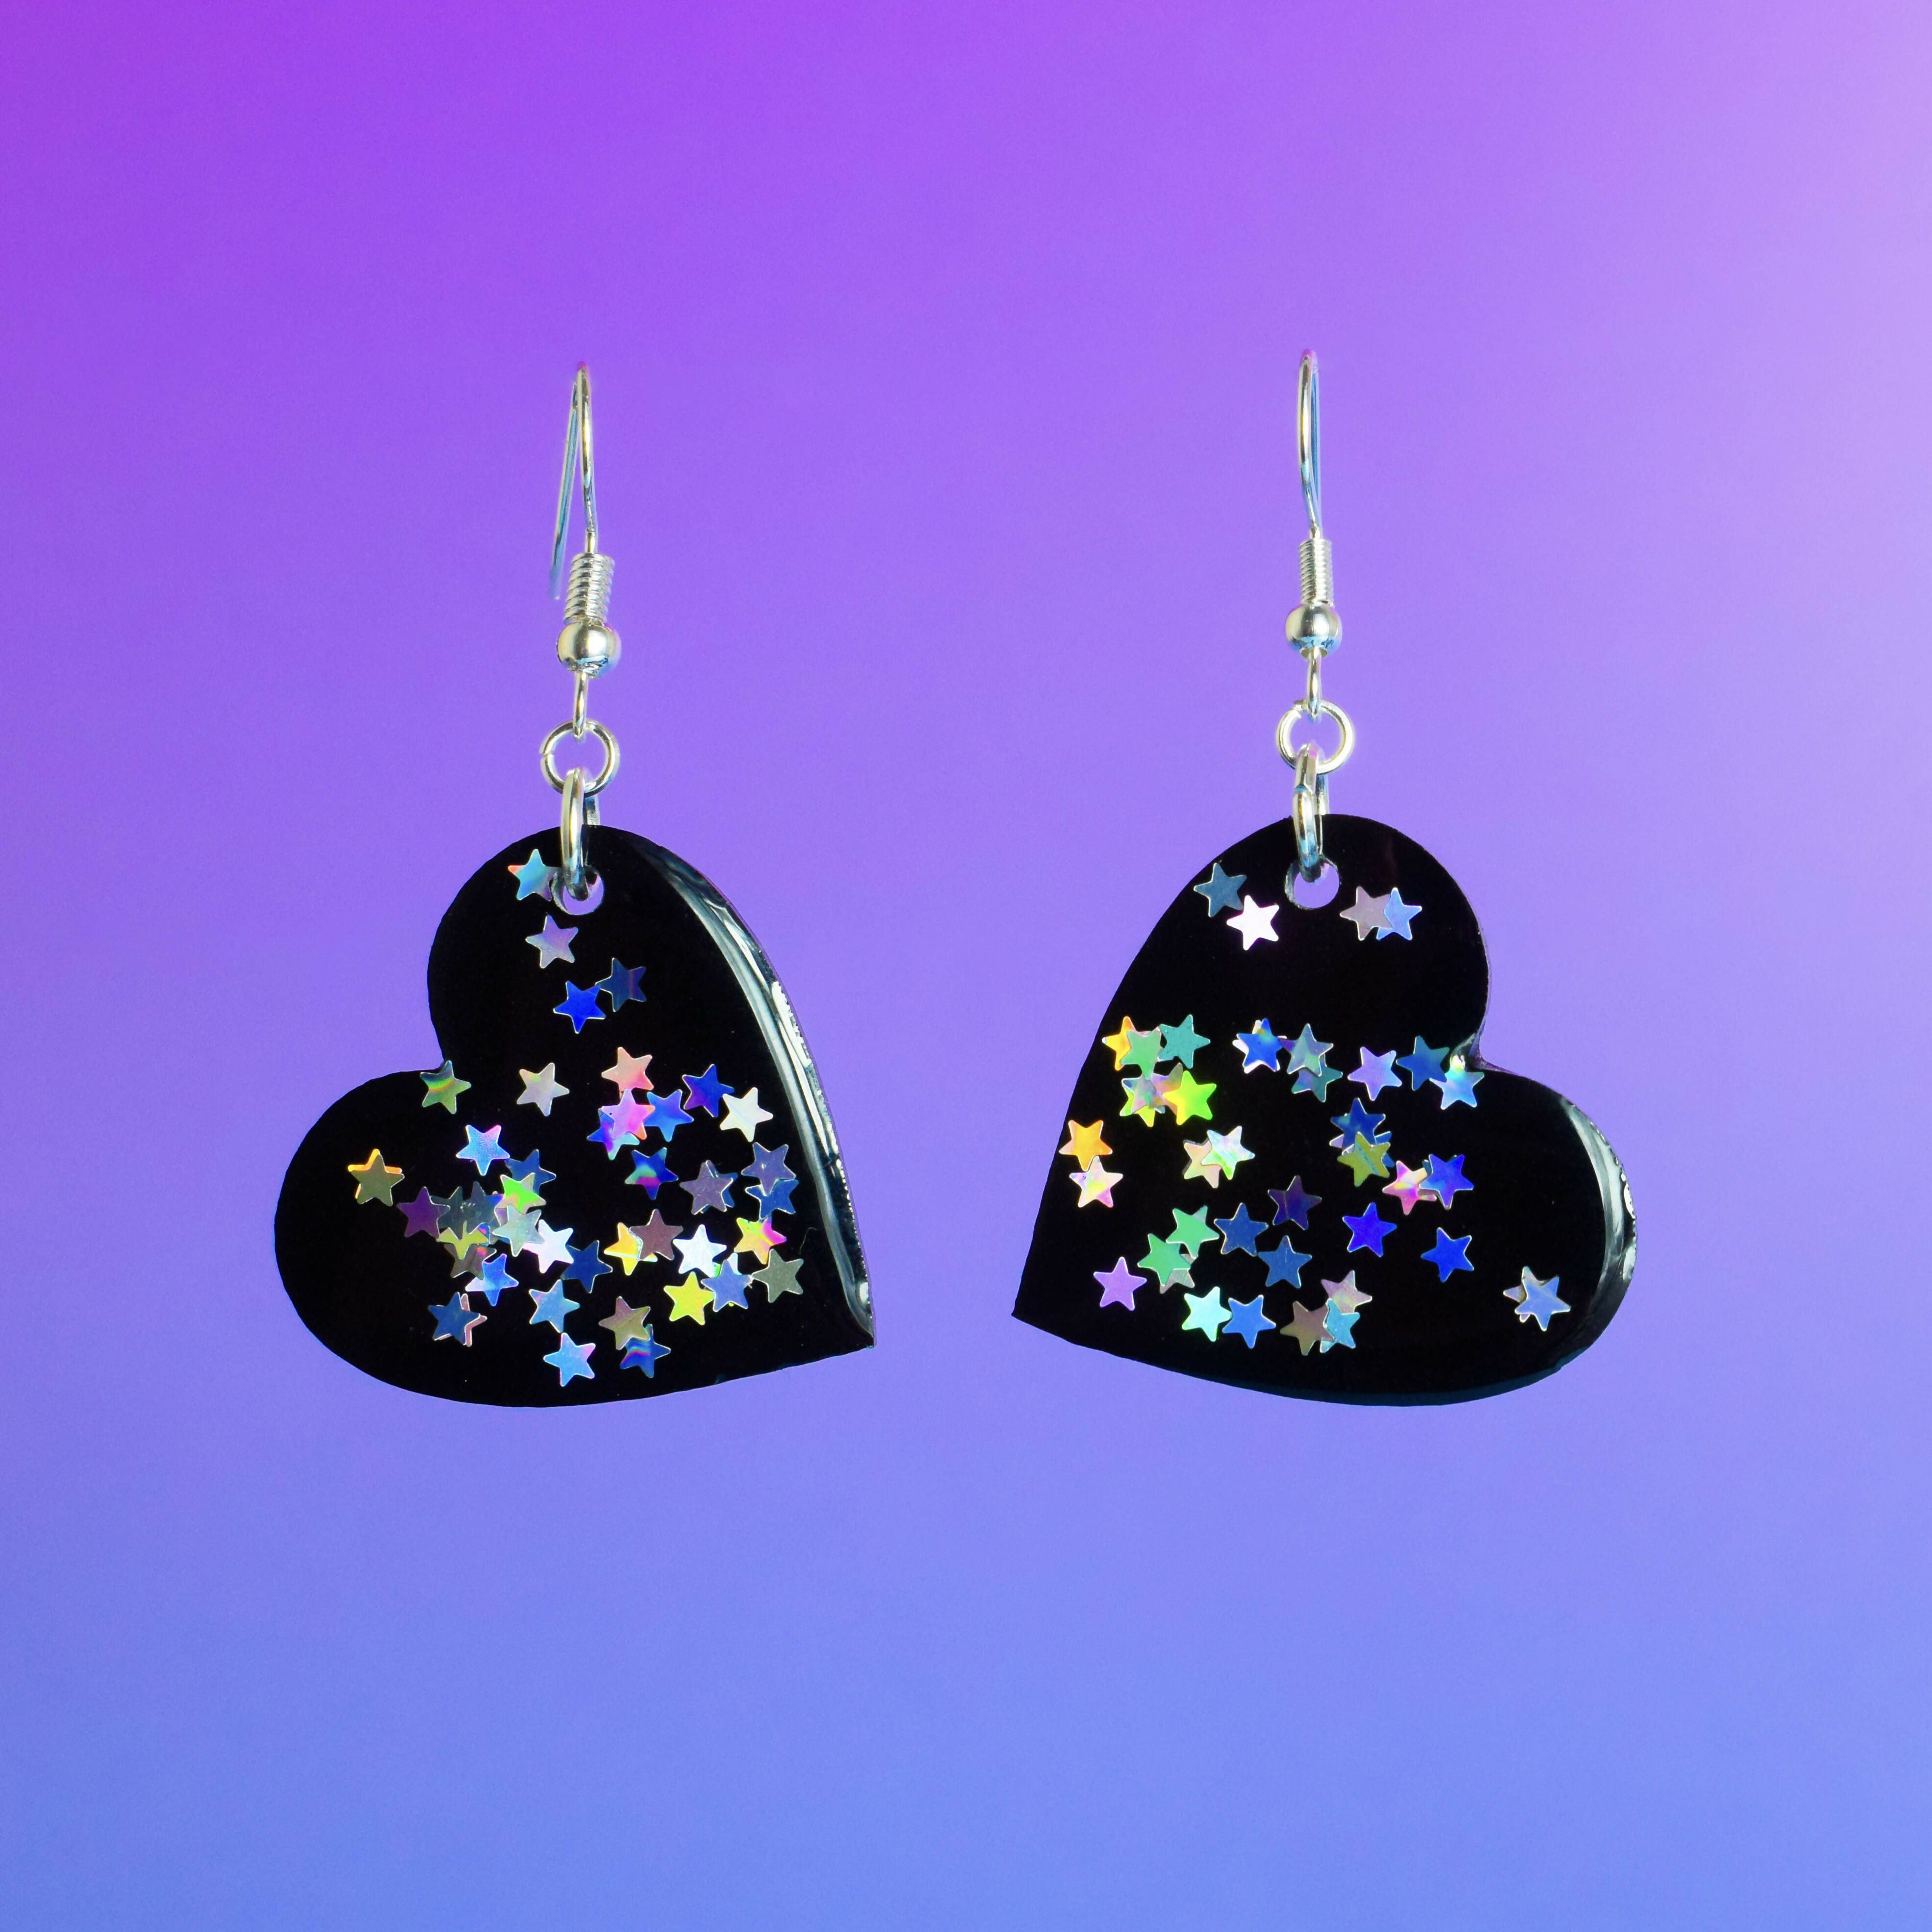 Resin Heart Shaped Earrings Glittery Resin Earrings Festival Earrings Cute Earrings Sparkly Earrings Holographic Stars Bewitched Halloween